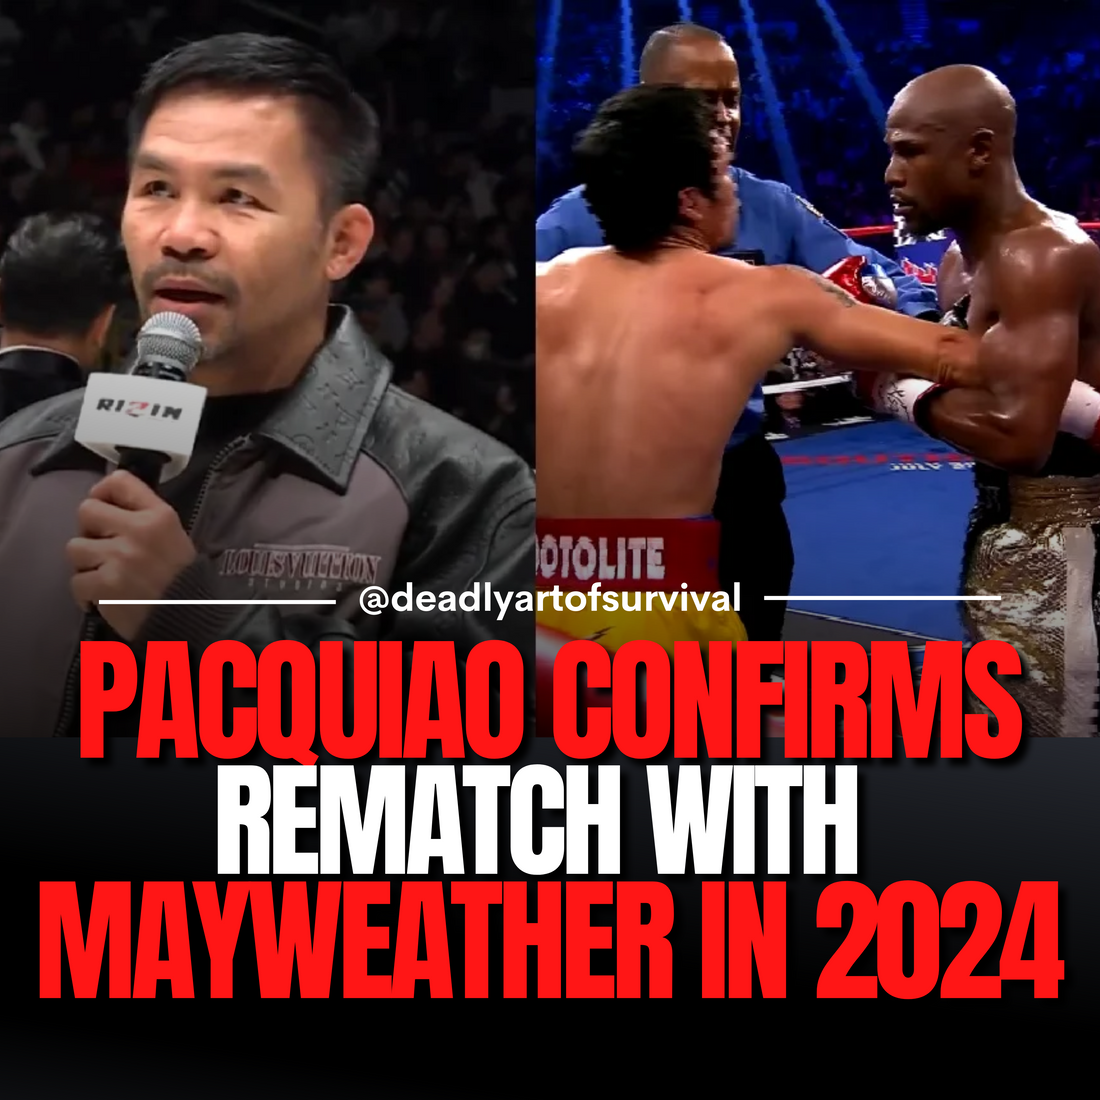 Pacquiao-and-Mayweather-Rematch-Confirmed-for-2024 deadlyartofsurvival.com